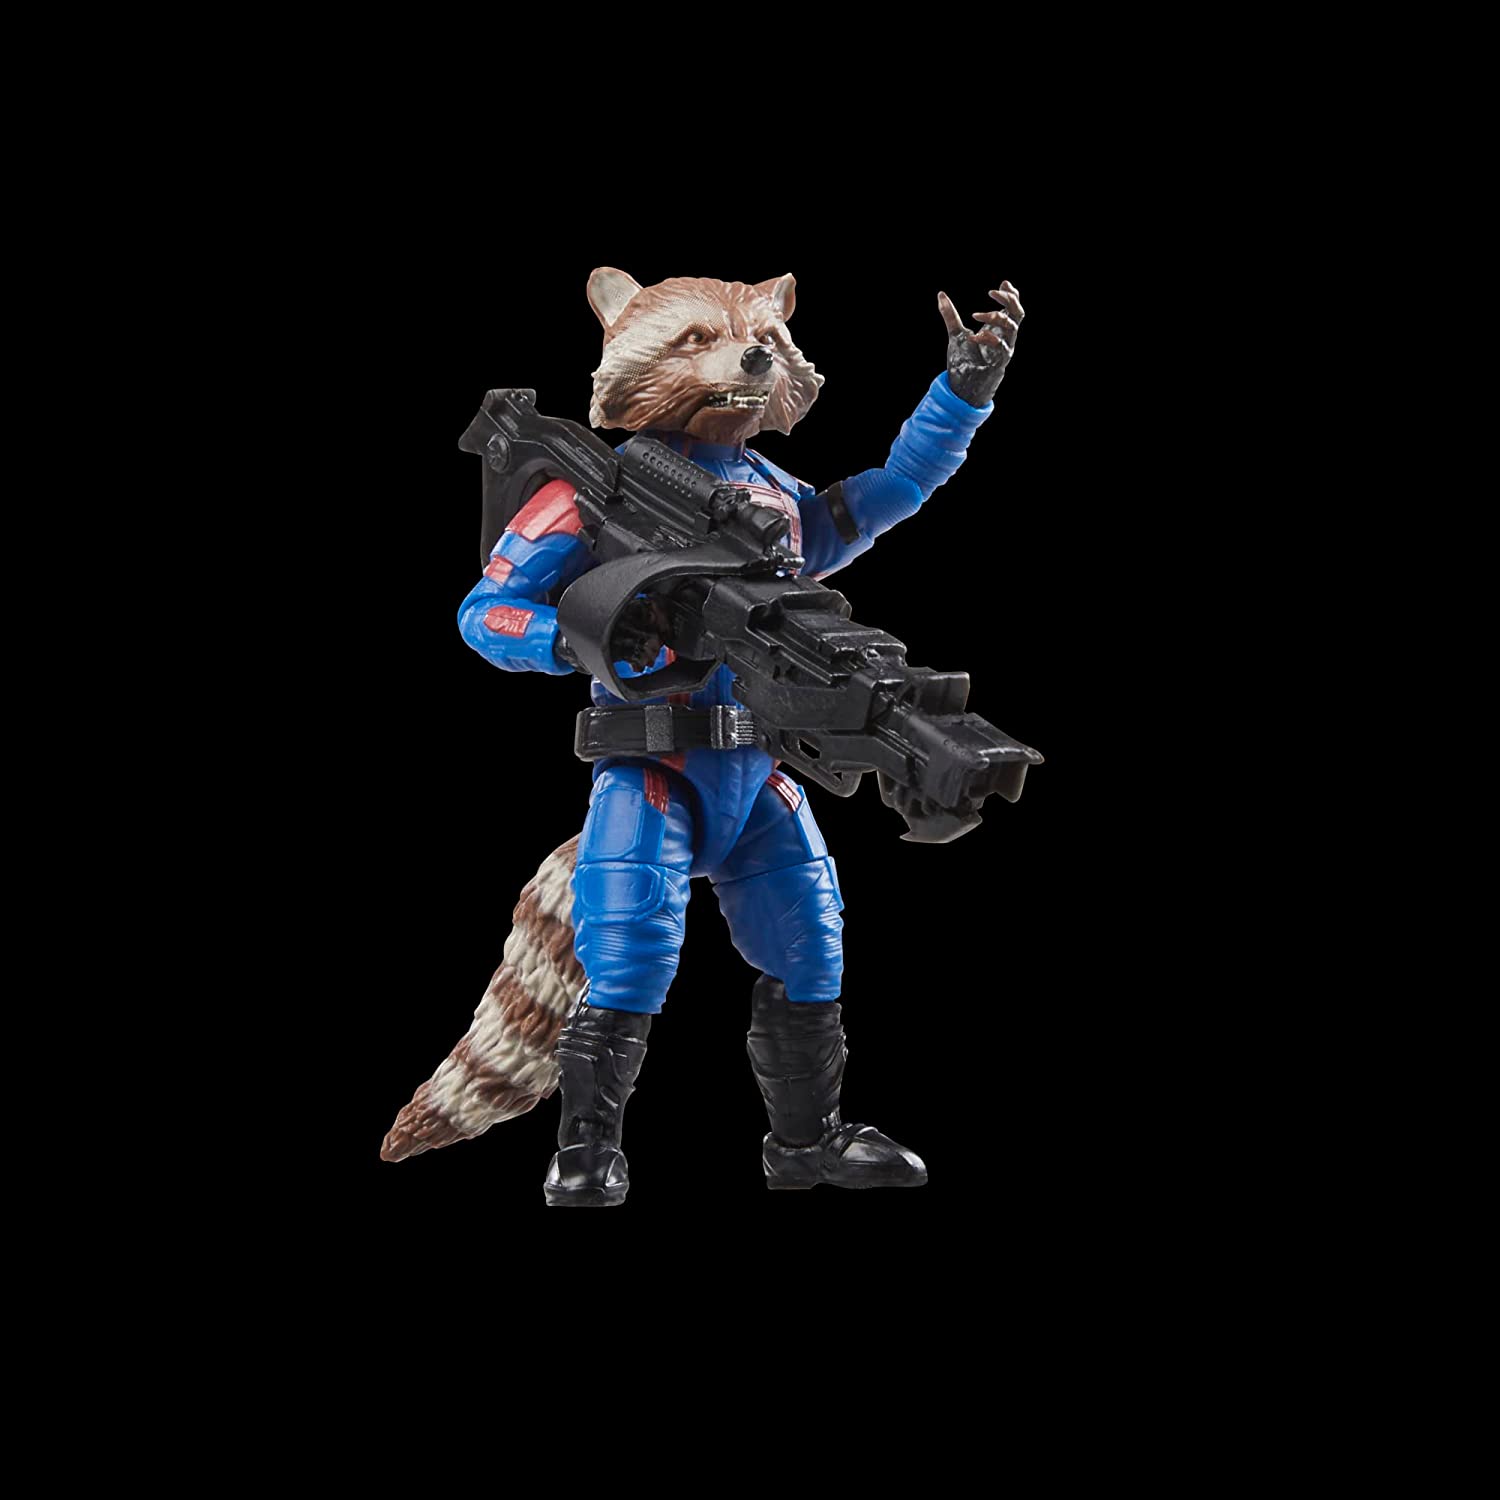 Guardians of The Galaxy Vol. 3 Marvel Legends Rocket 6-Inch Action Figure Toy standing pose with one hand gesture - Heretoserveyou